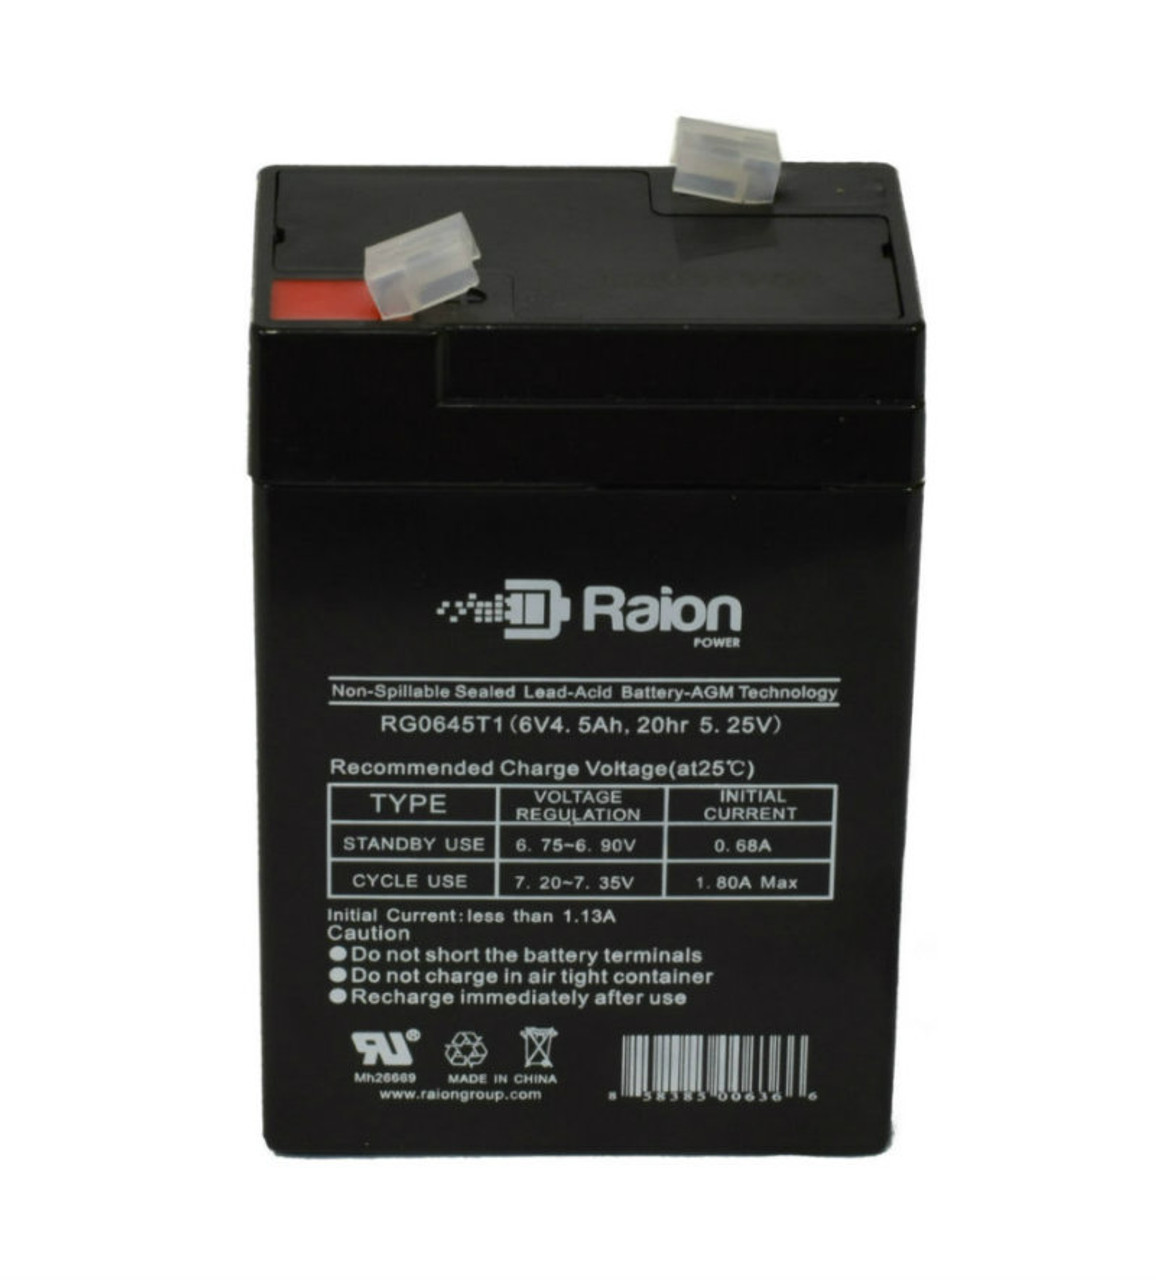 Raion Power RG0645T1 Replacement Battery Cartridge for Light Alarms RC